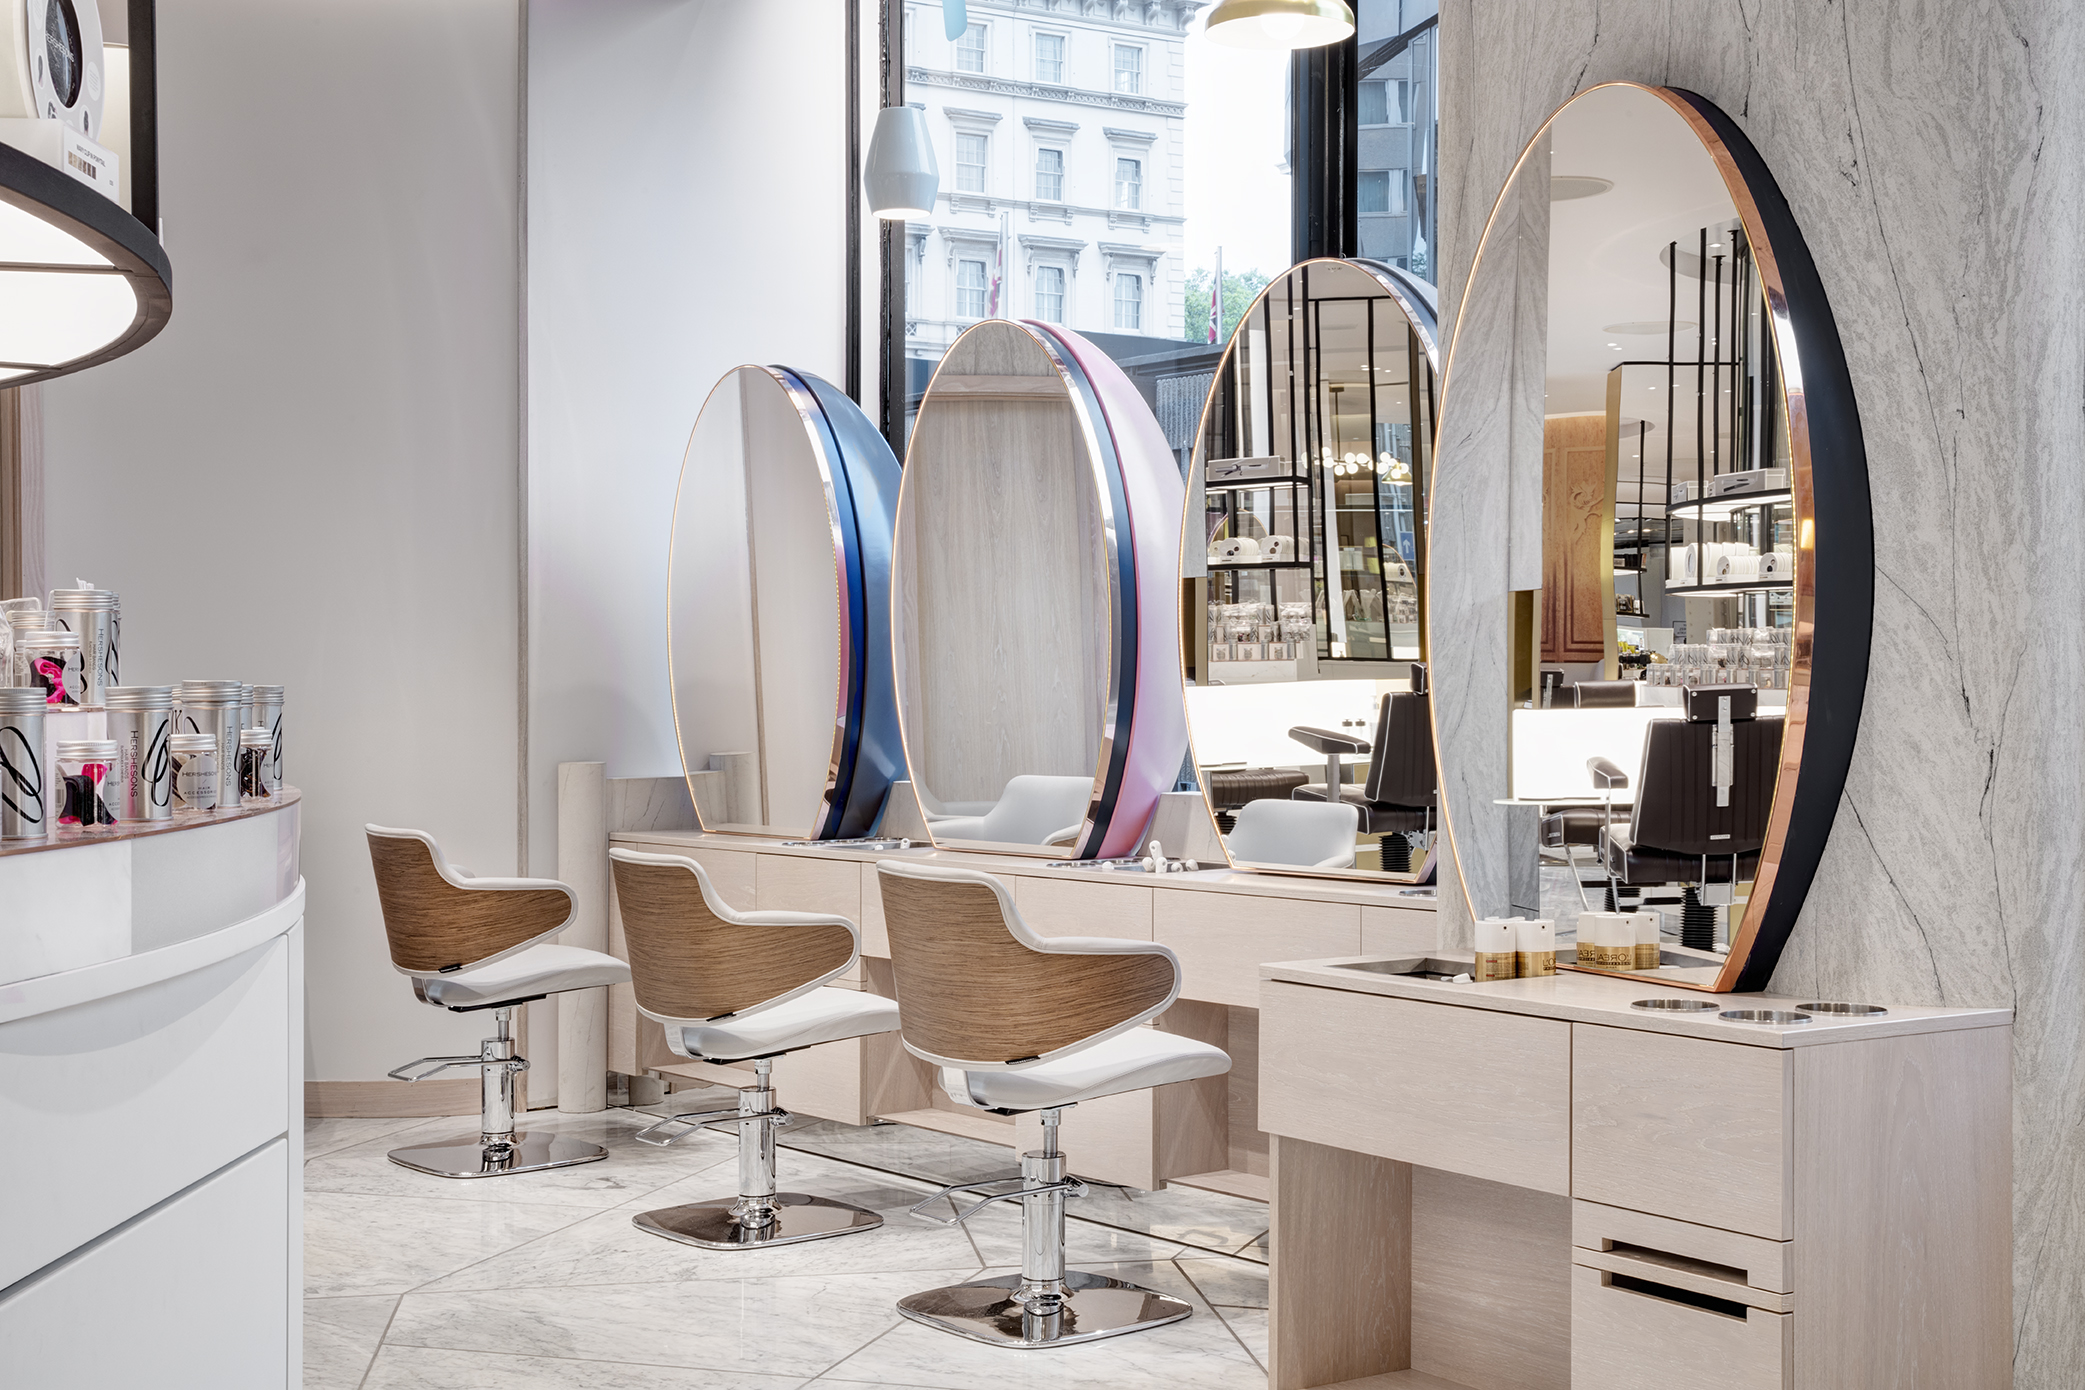 Blow dries will be on offer in the Beauty Lounge